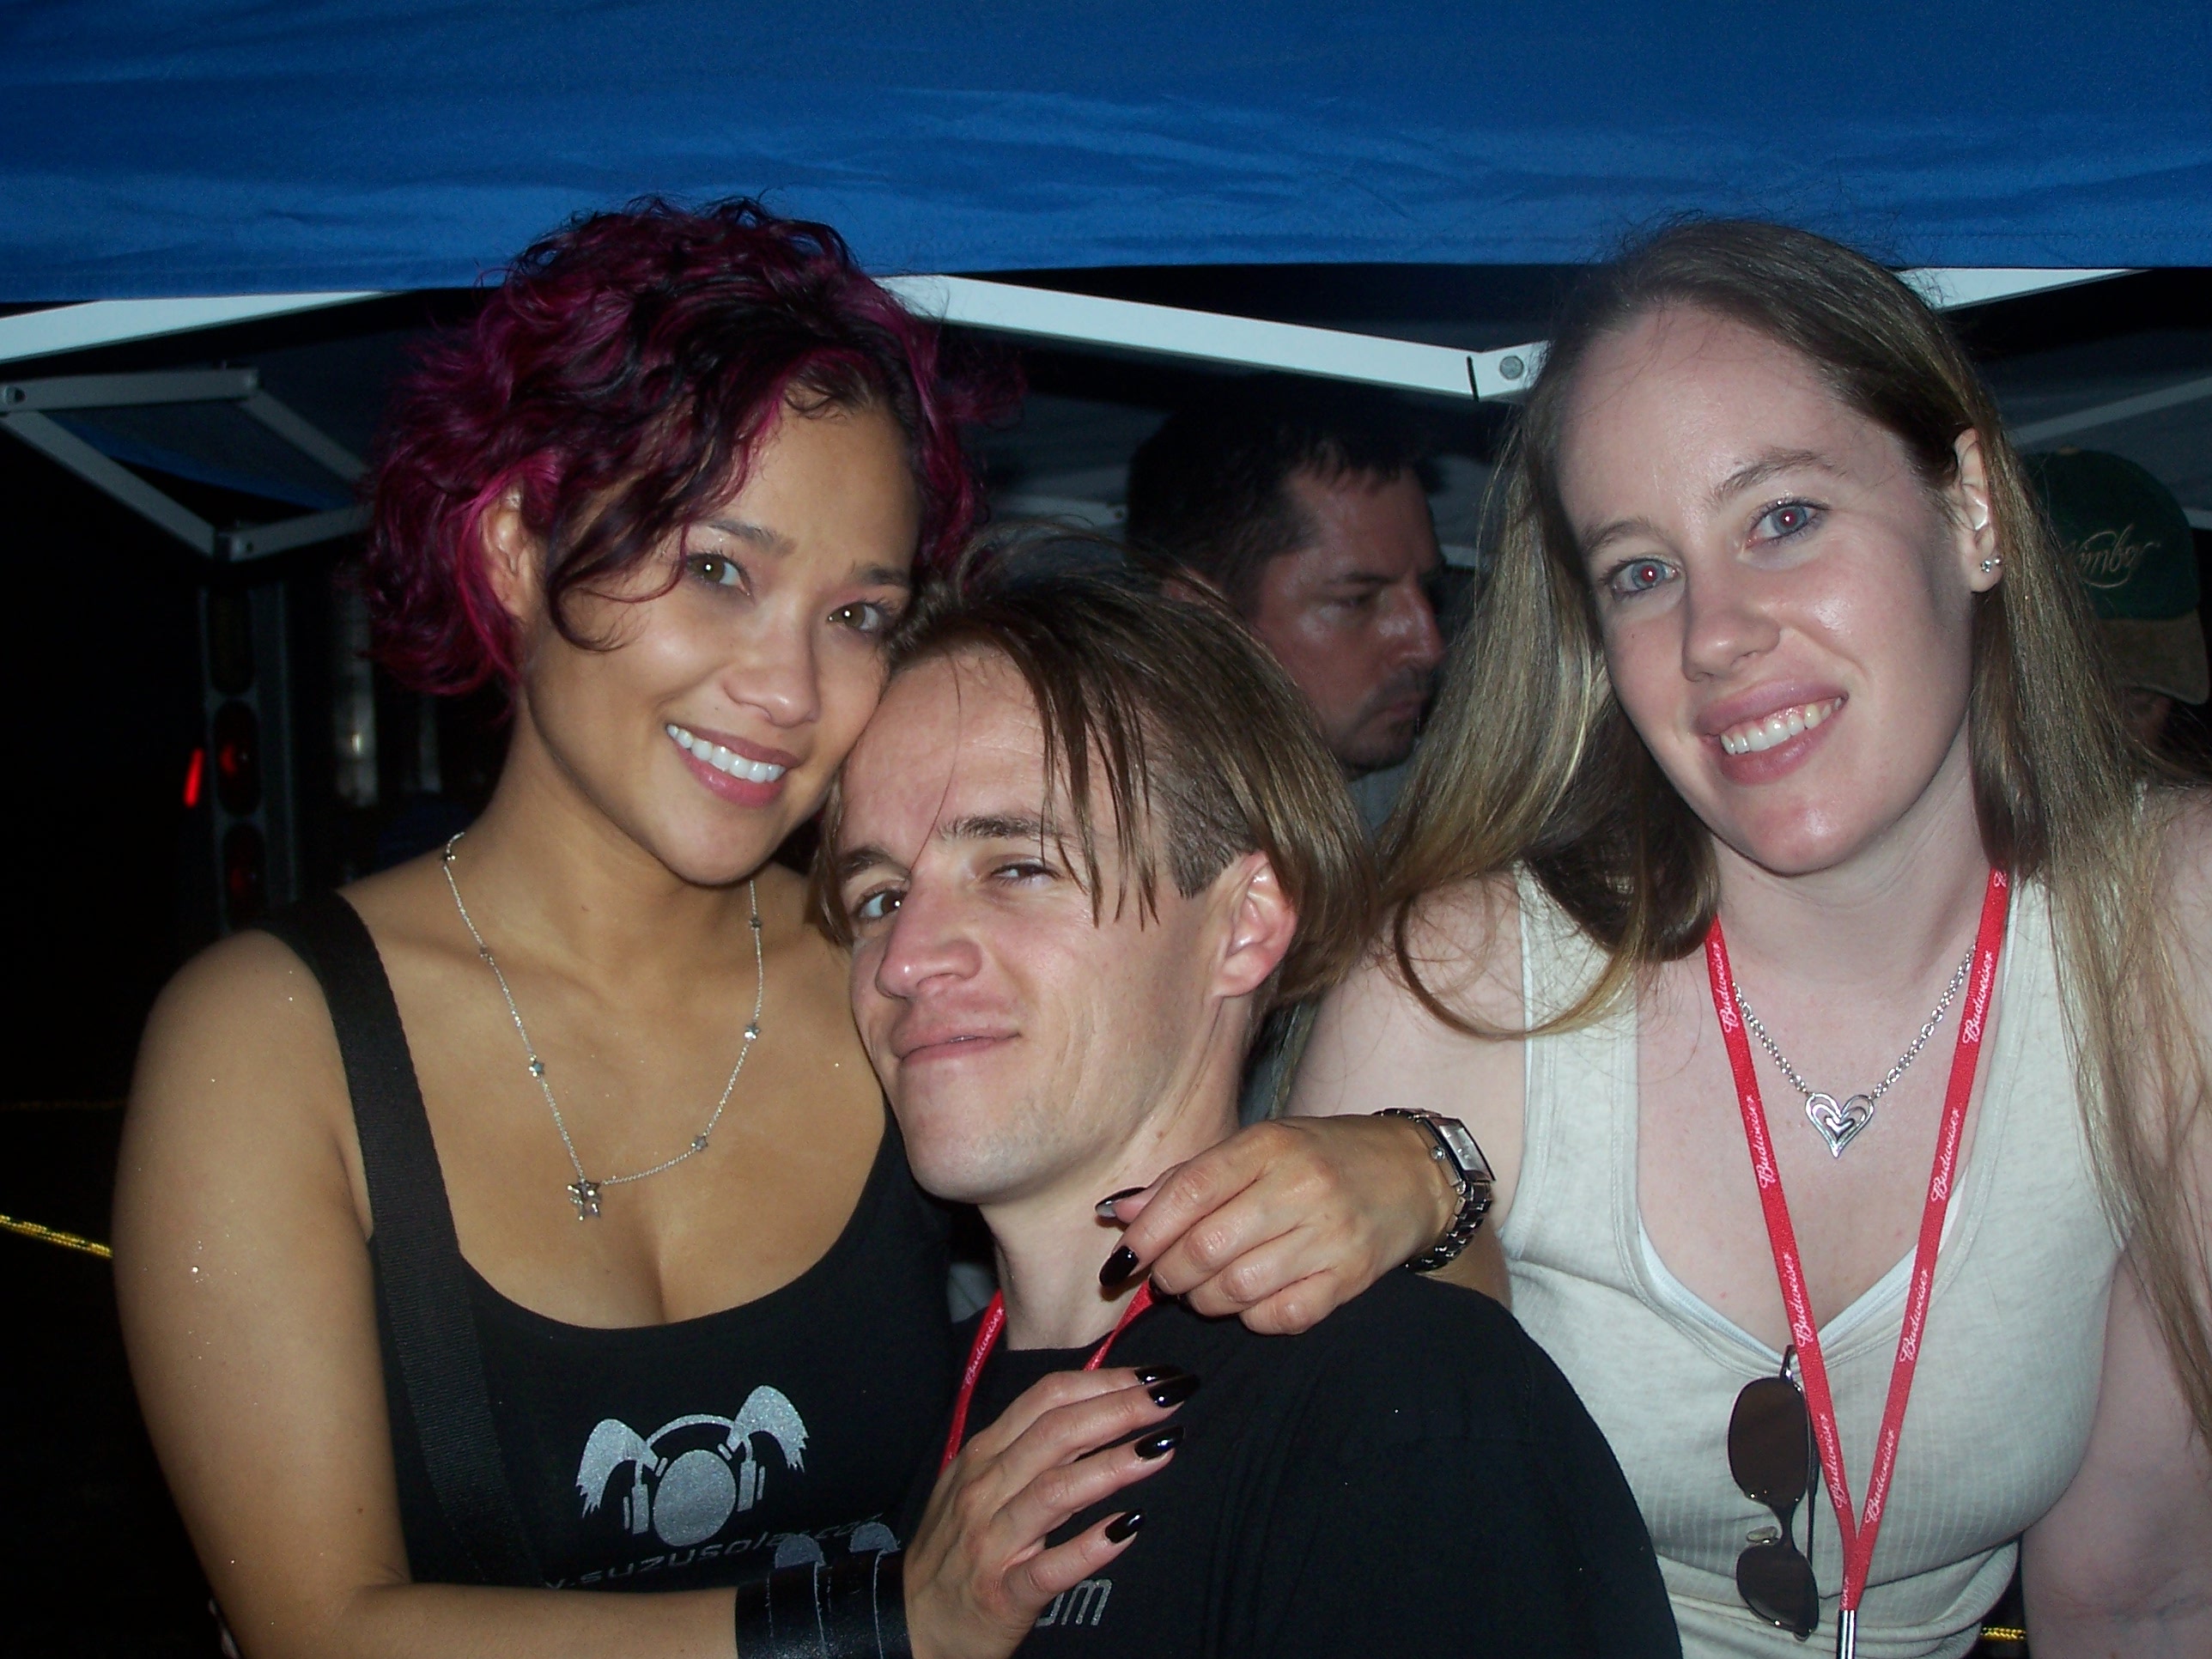 Sunset 06 - Suzy, Lil B, & Colleen